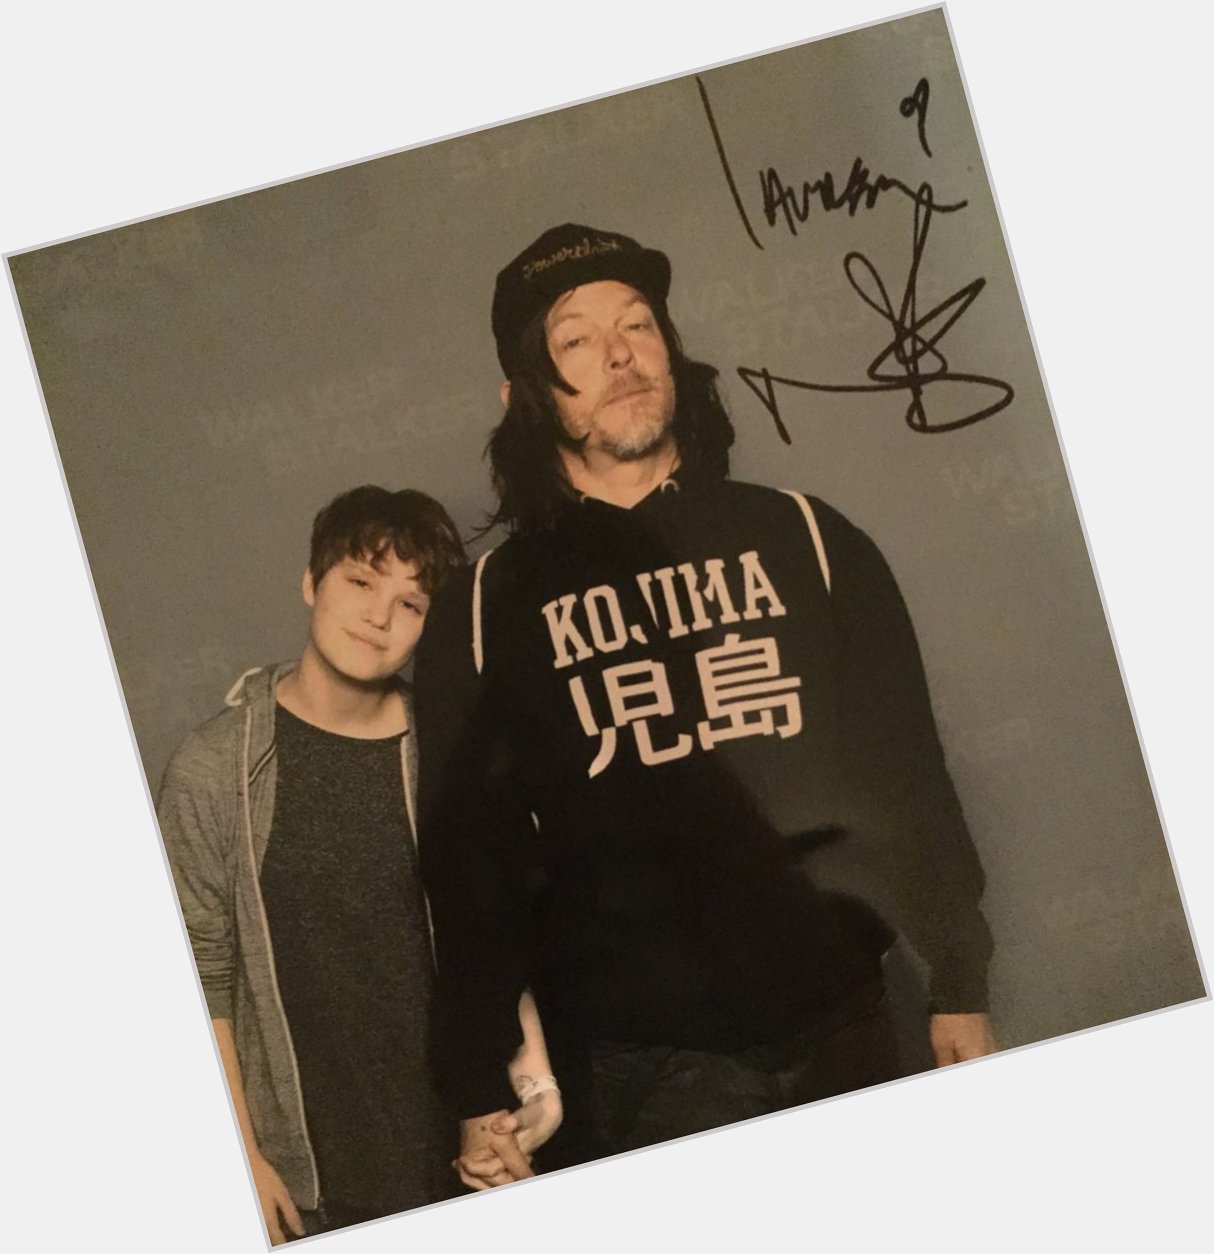 Happy birthday Norman Reedus! Hope you had an amazing day! Much love        